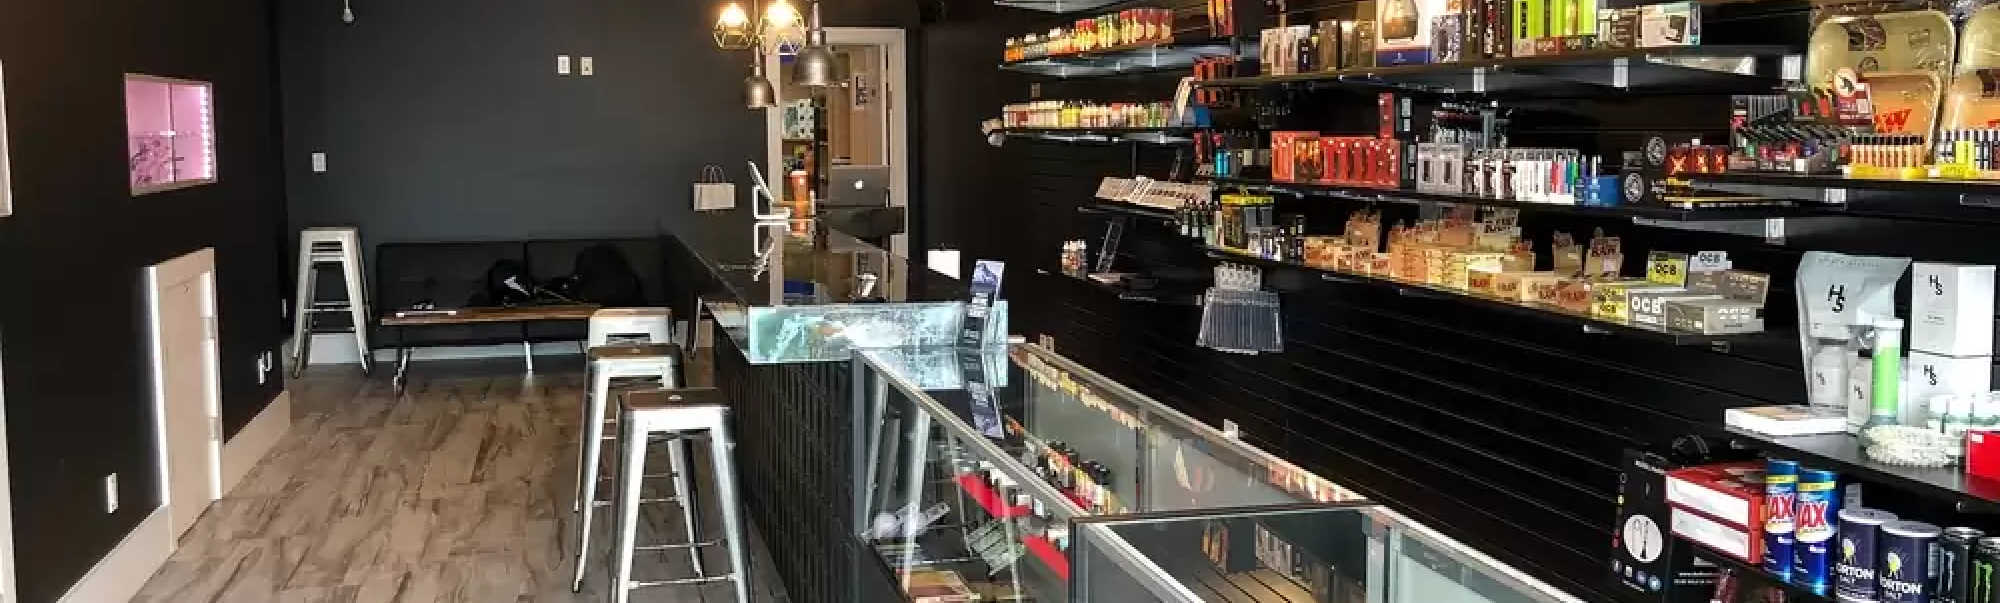 image of the joint smoke shop in lincoln ne